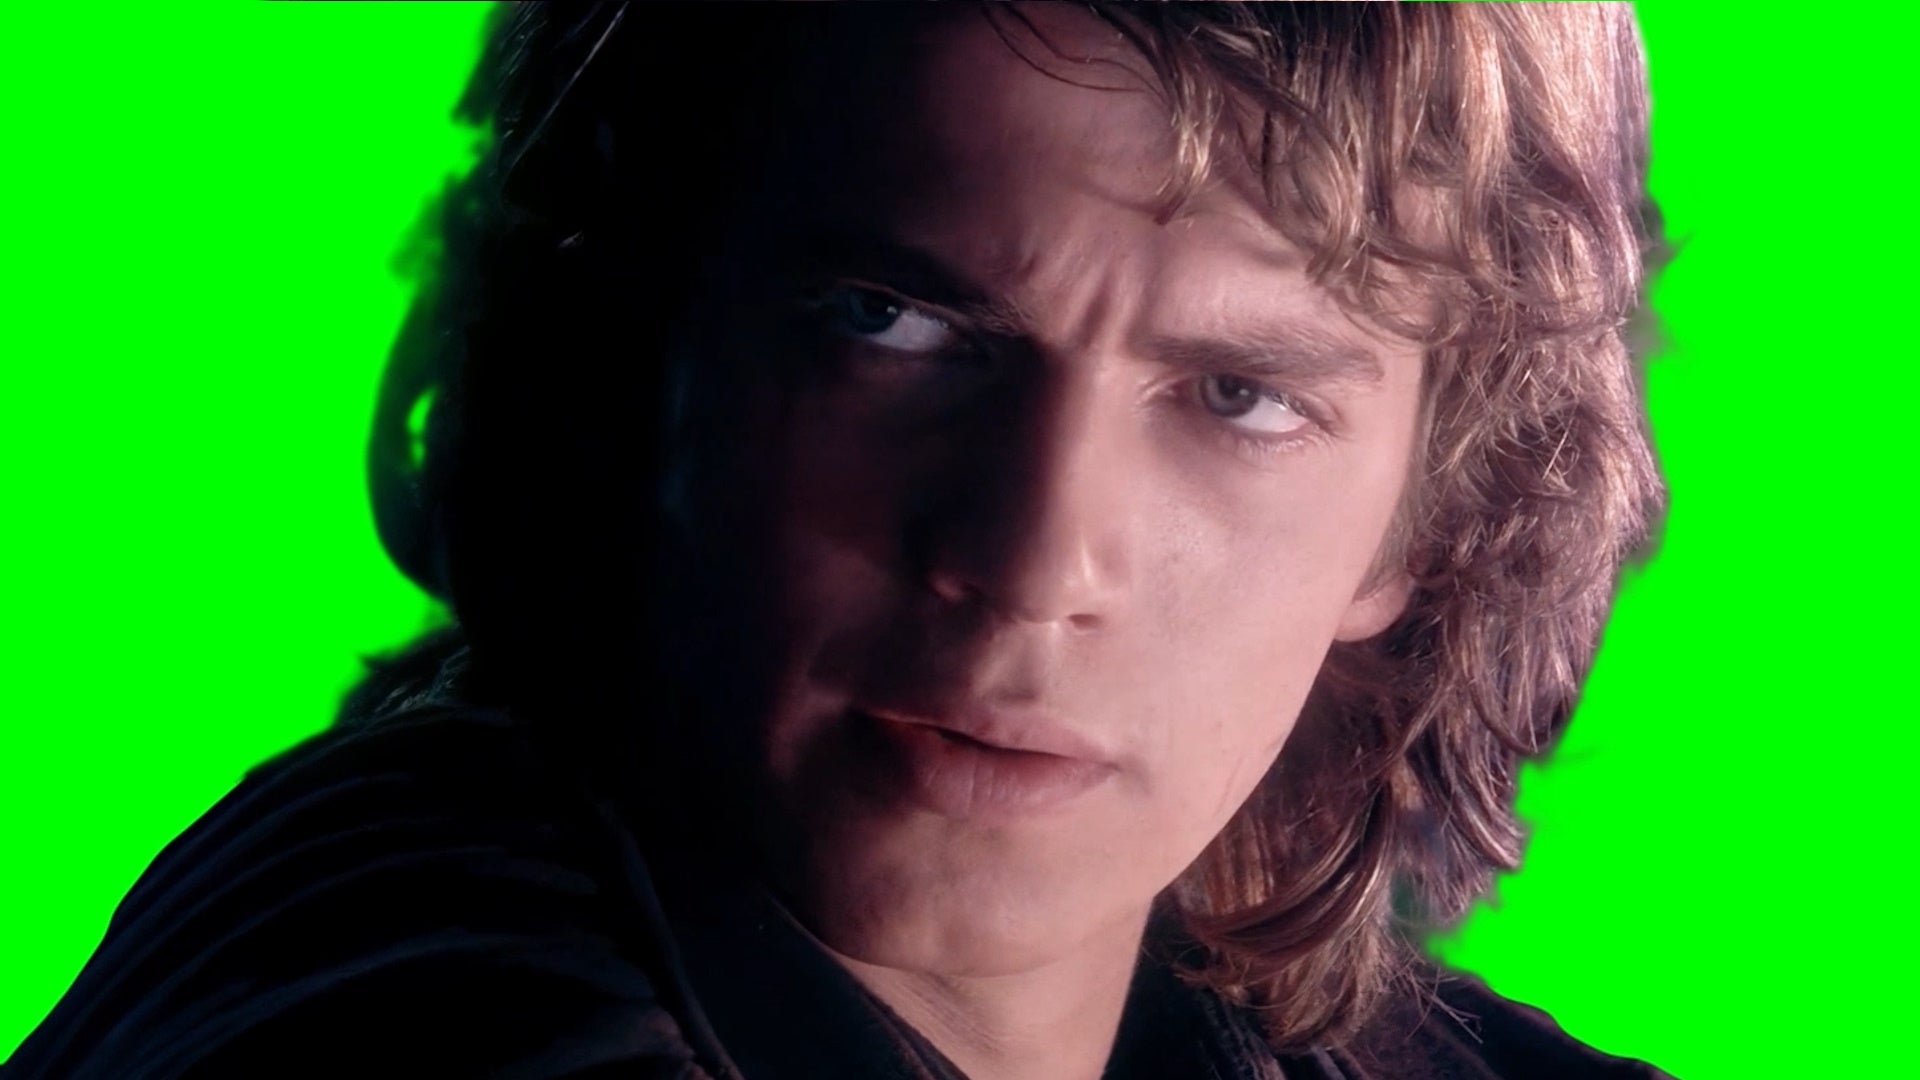 Is it possible to learn this power? - Star Wars Episode III (Green Screen)